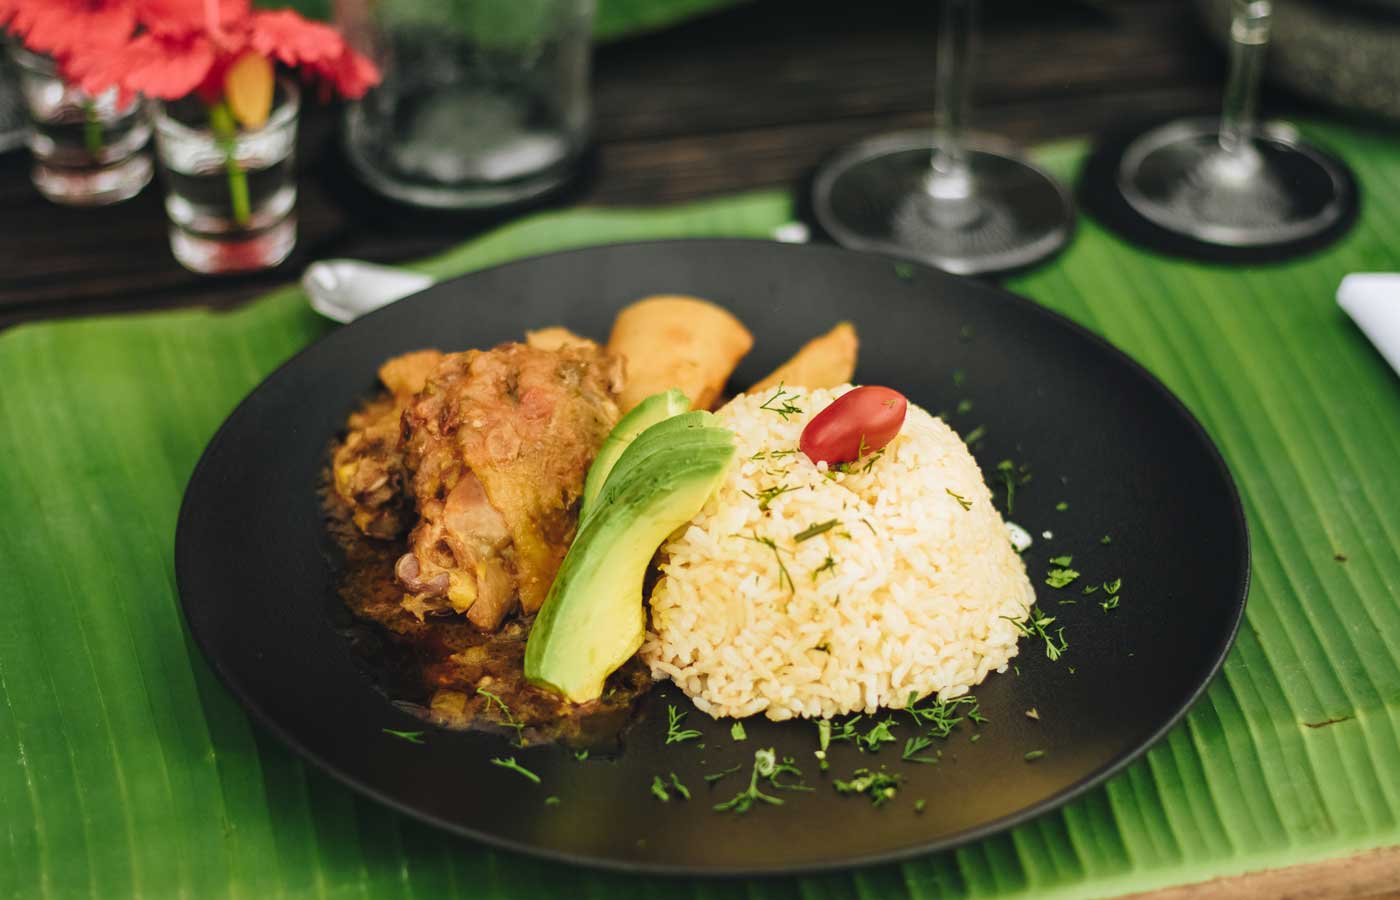 Traditional cuisine at the Montemar Villas - Luxury holidays to Ecuador and the Galapagos